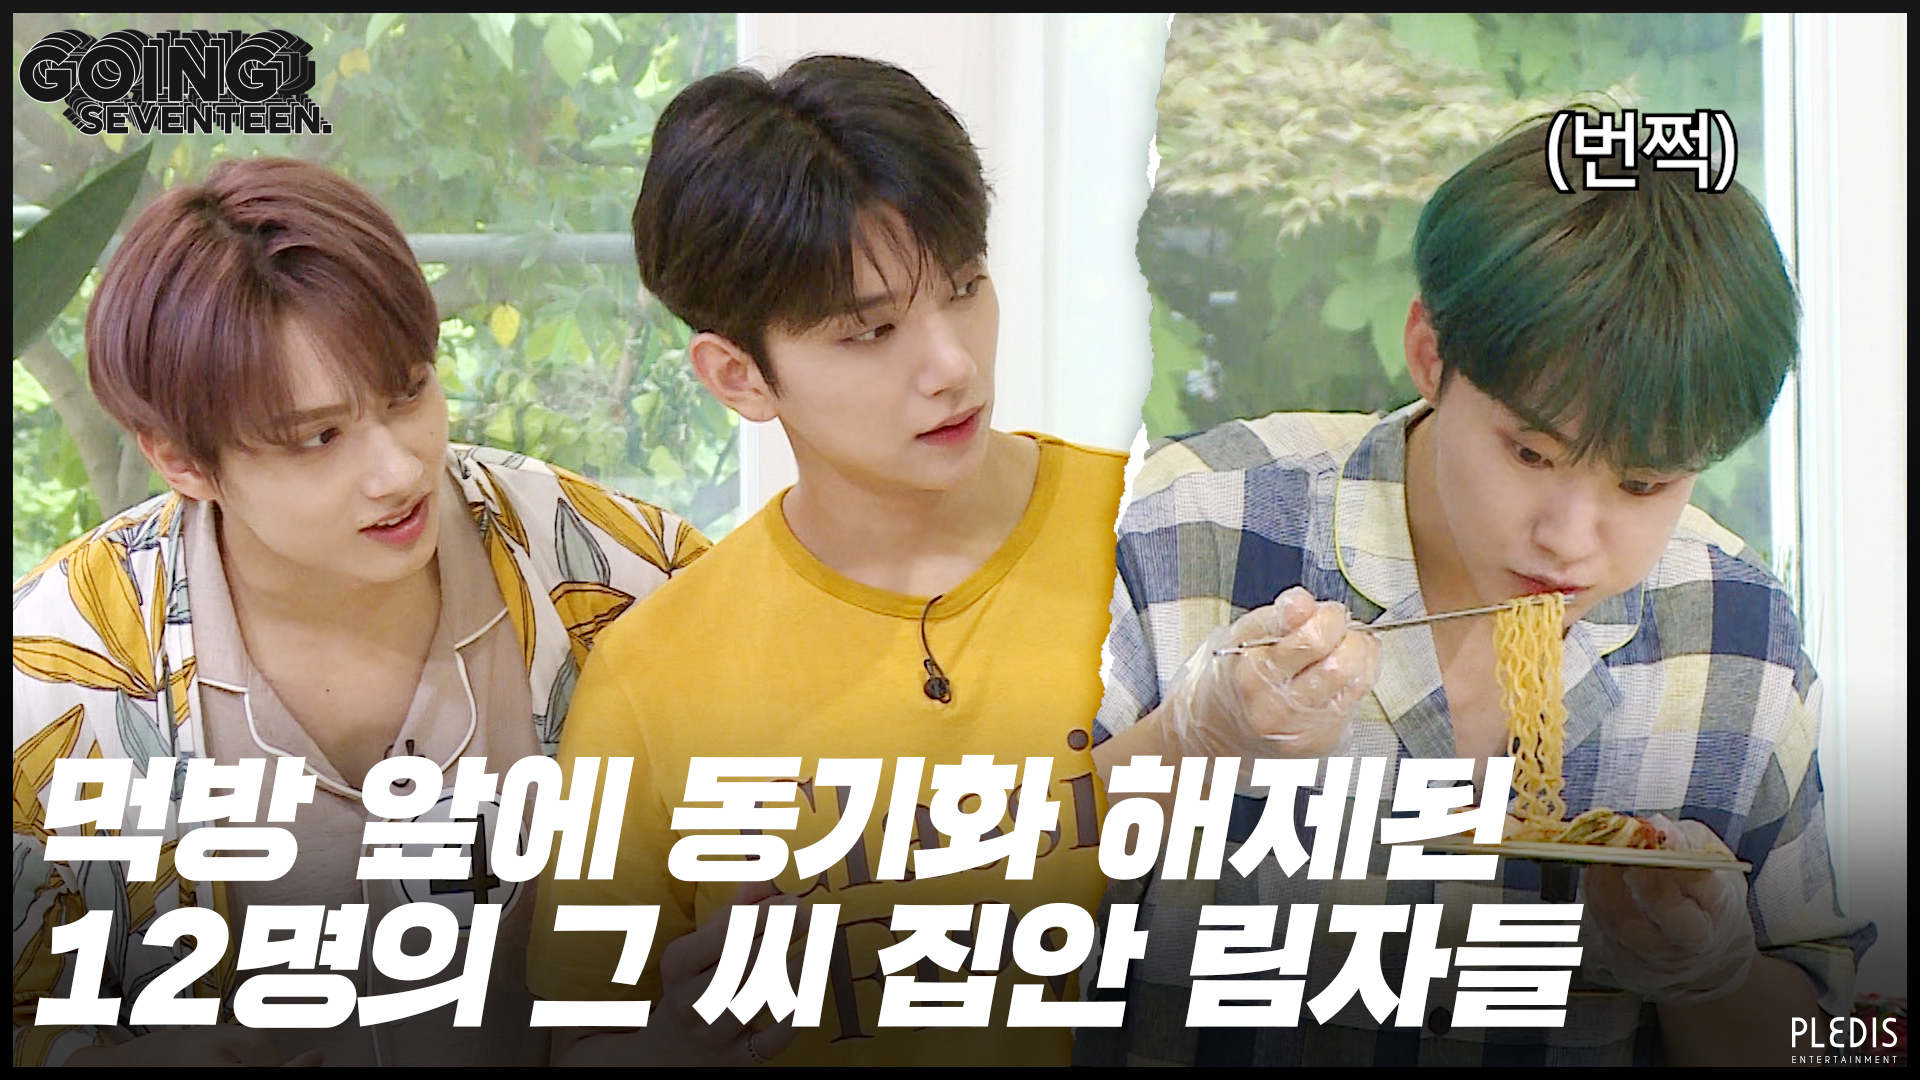 [GOING SEVENTEEN 2020] EP.26 디에잇과 12인의 그림자 #2 (THE 8 and the 12 Shadows #2)